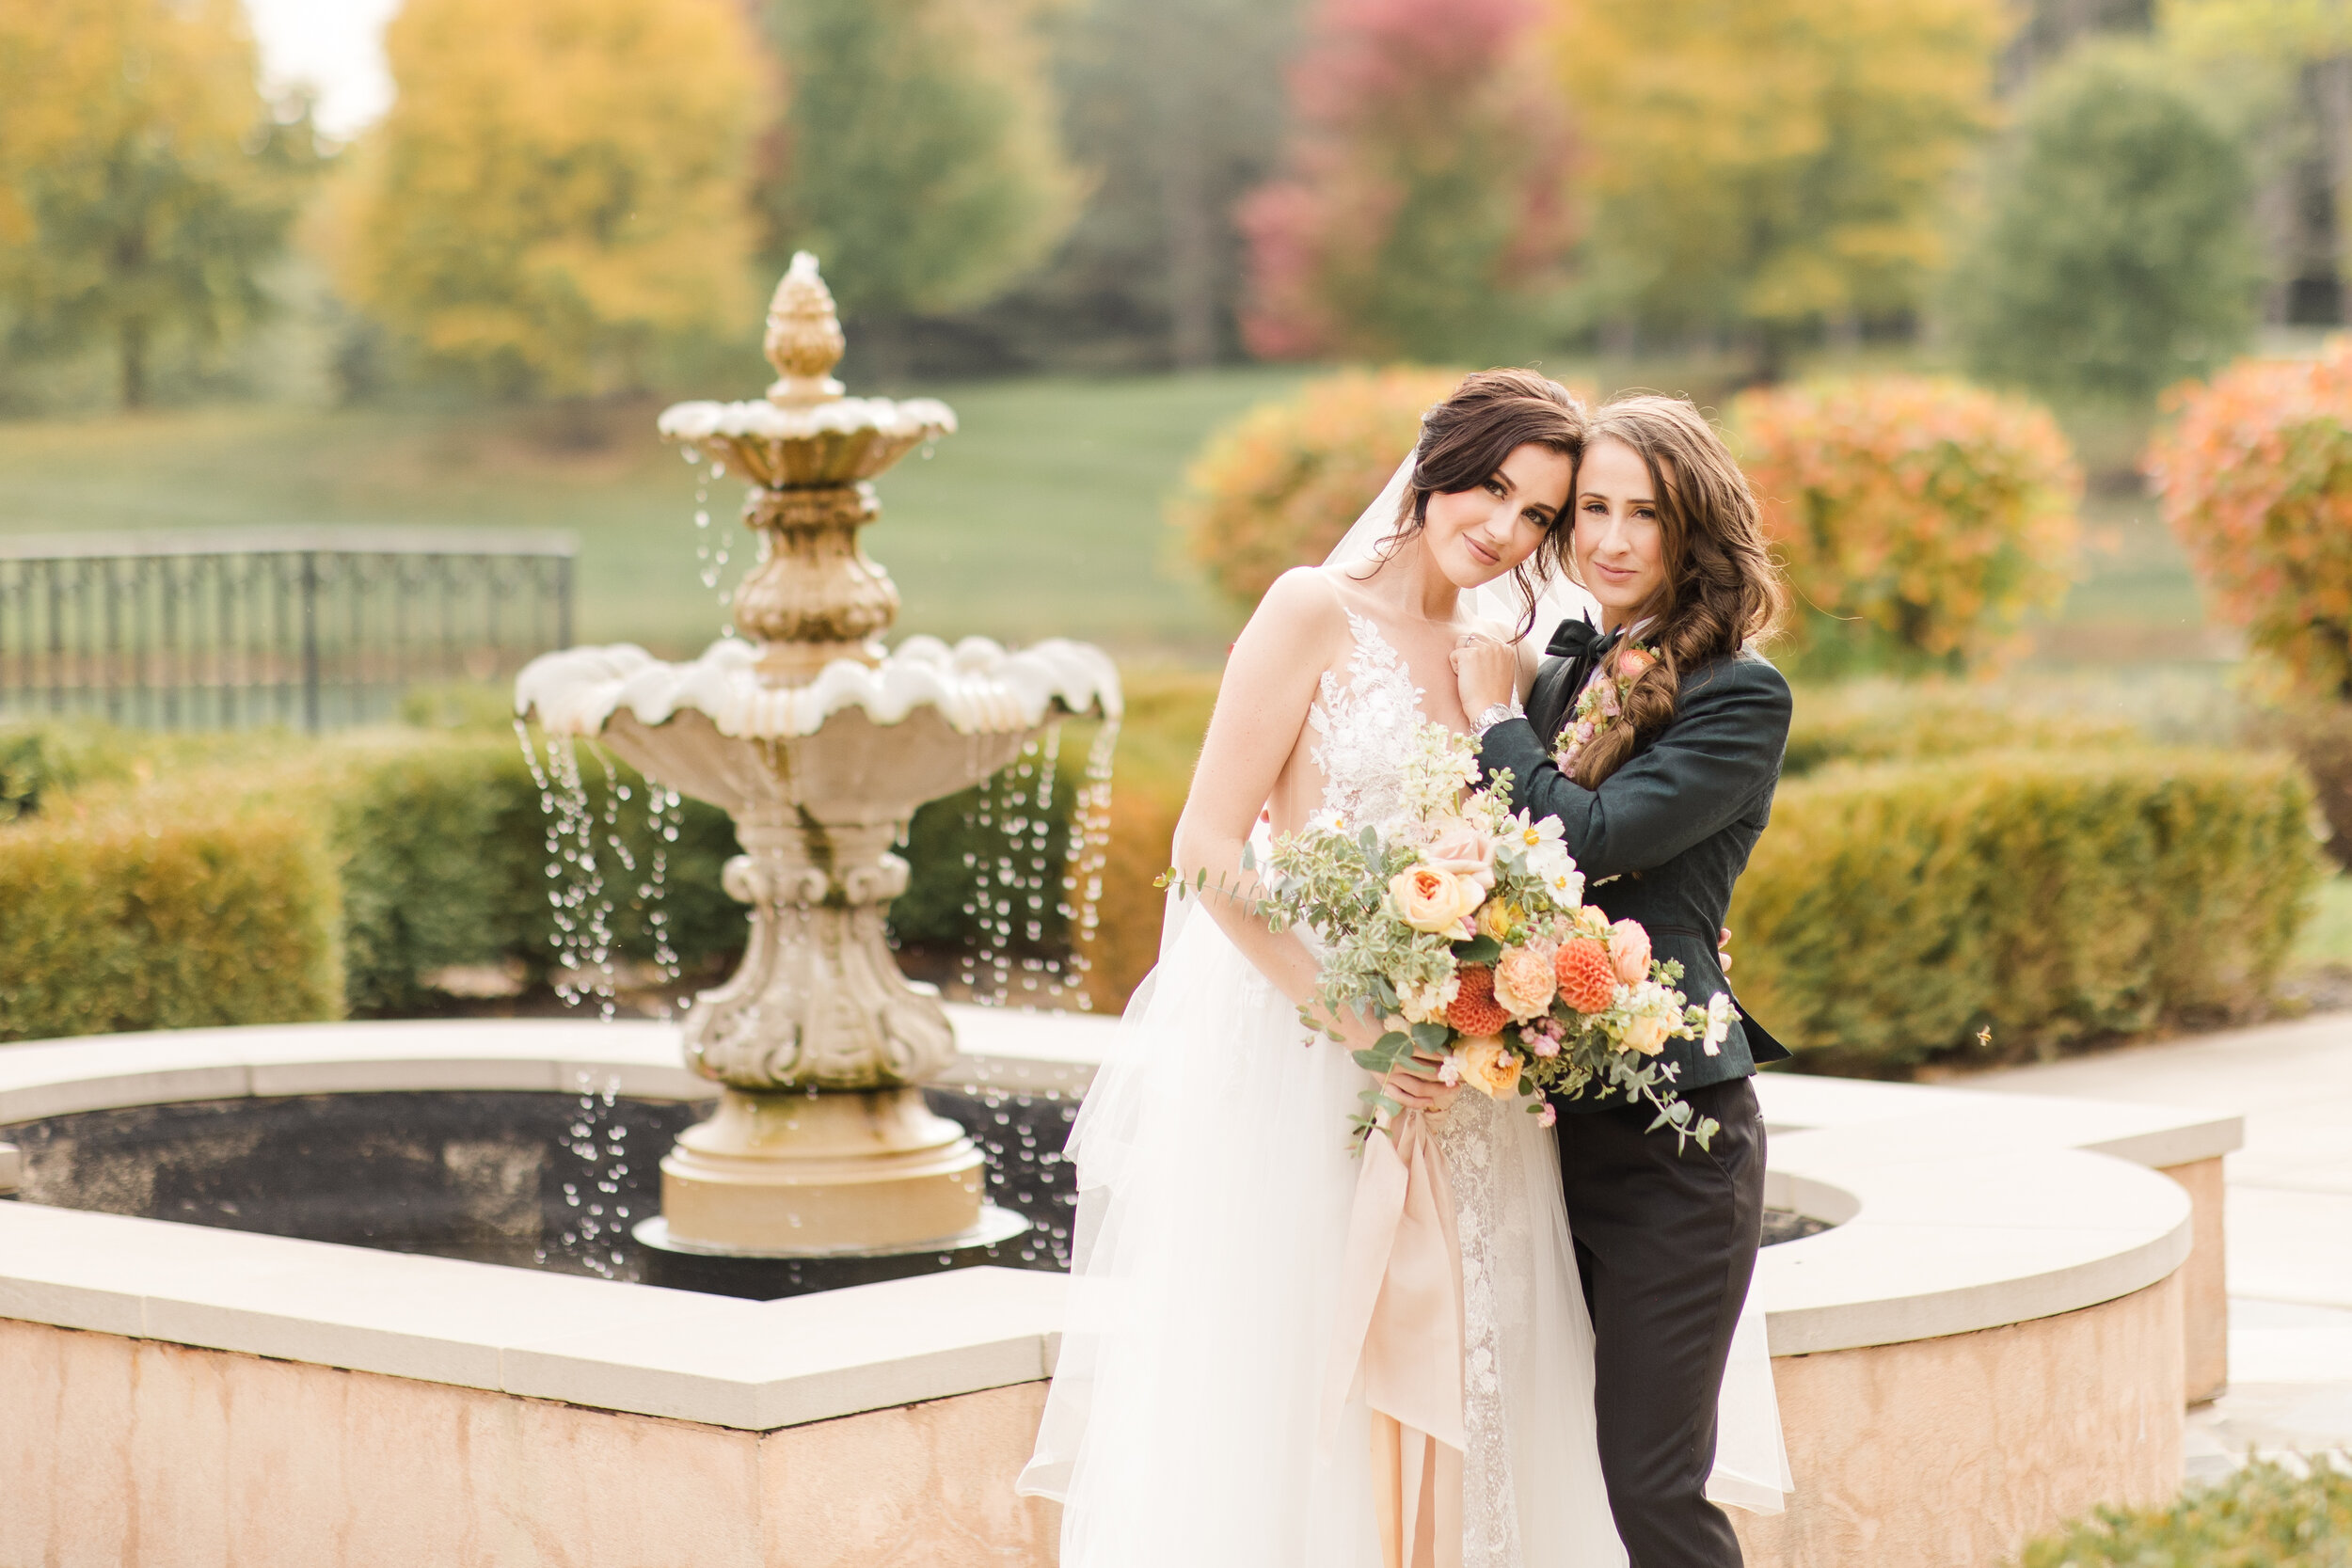 Autumn wedding inspiration at The Club at Corazon.